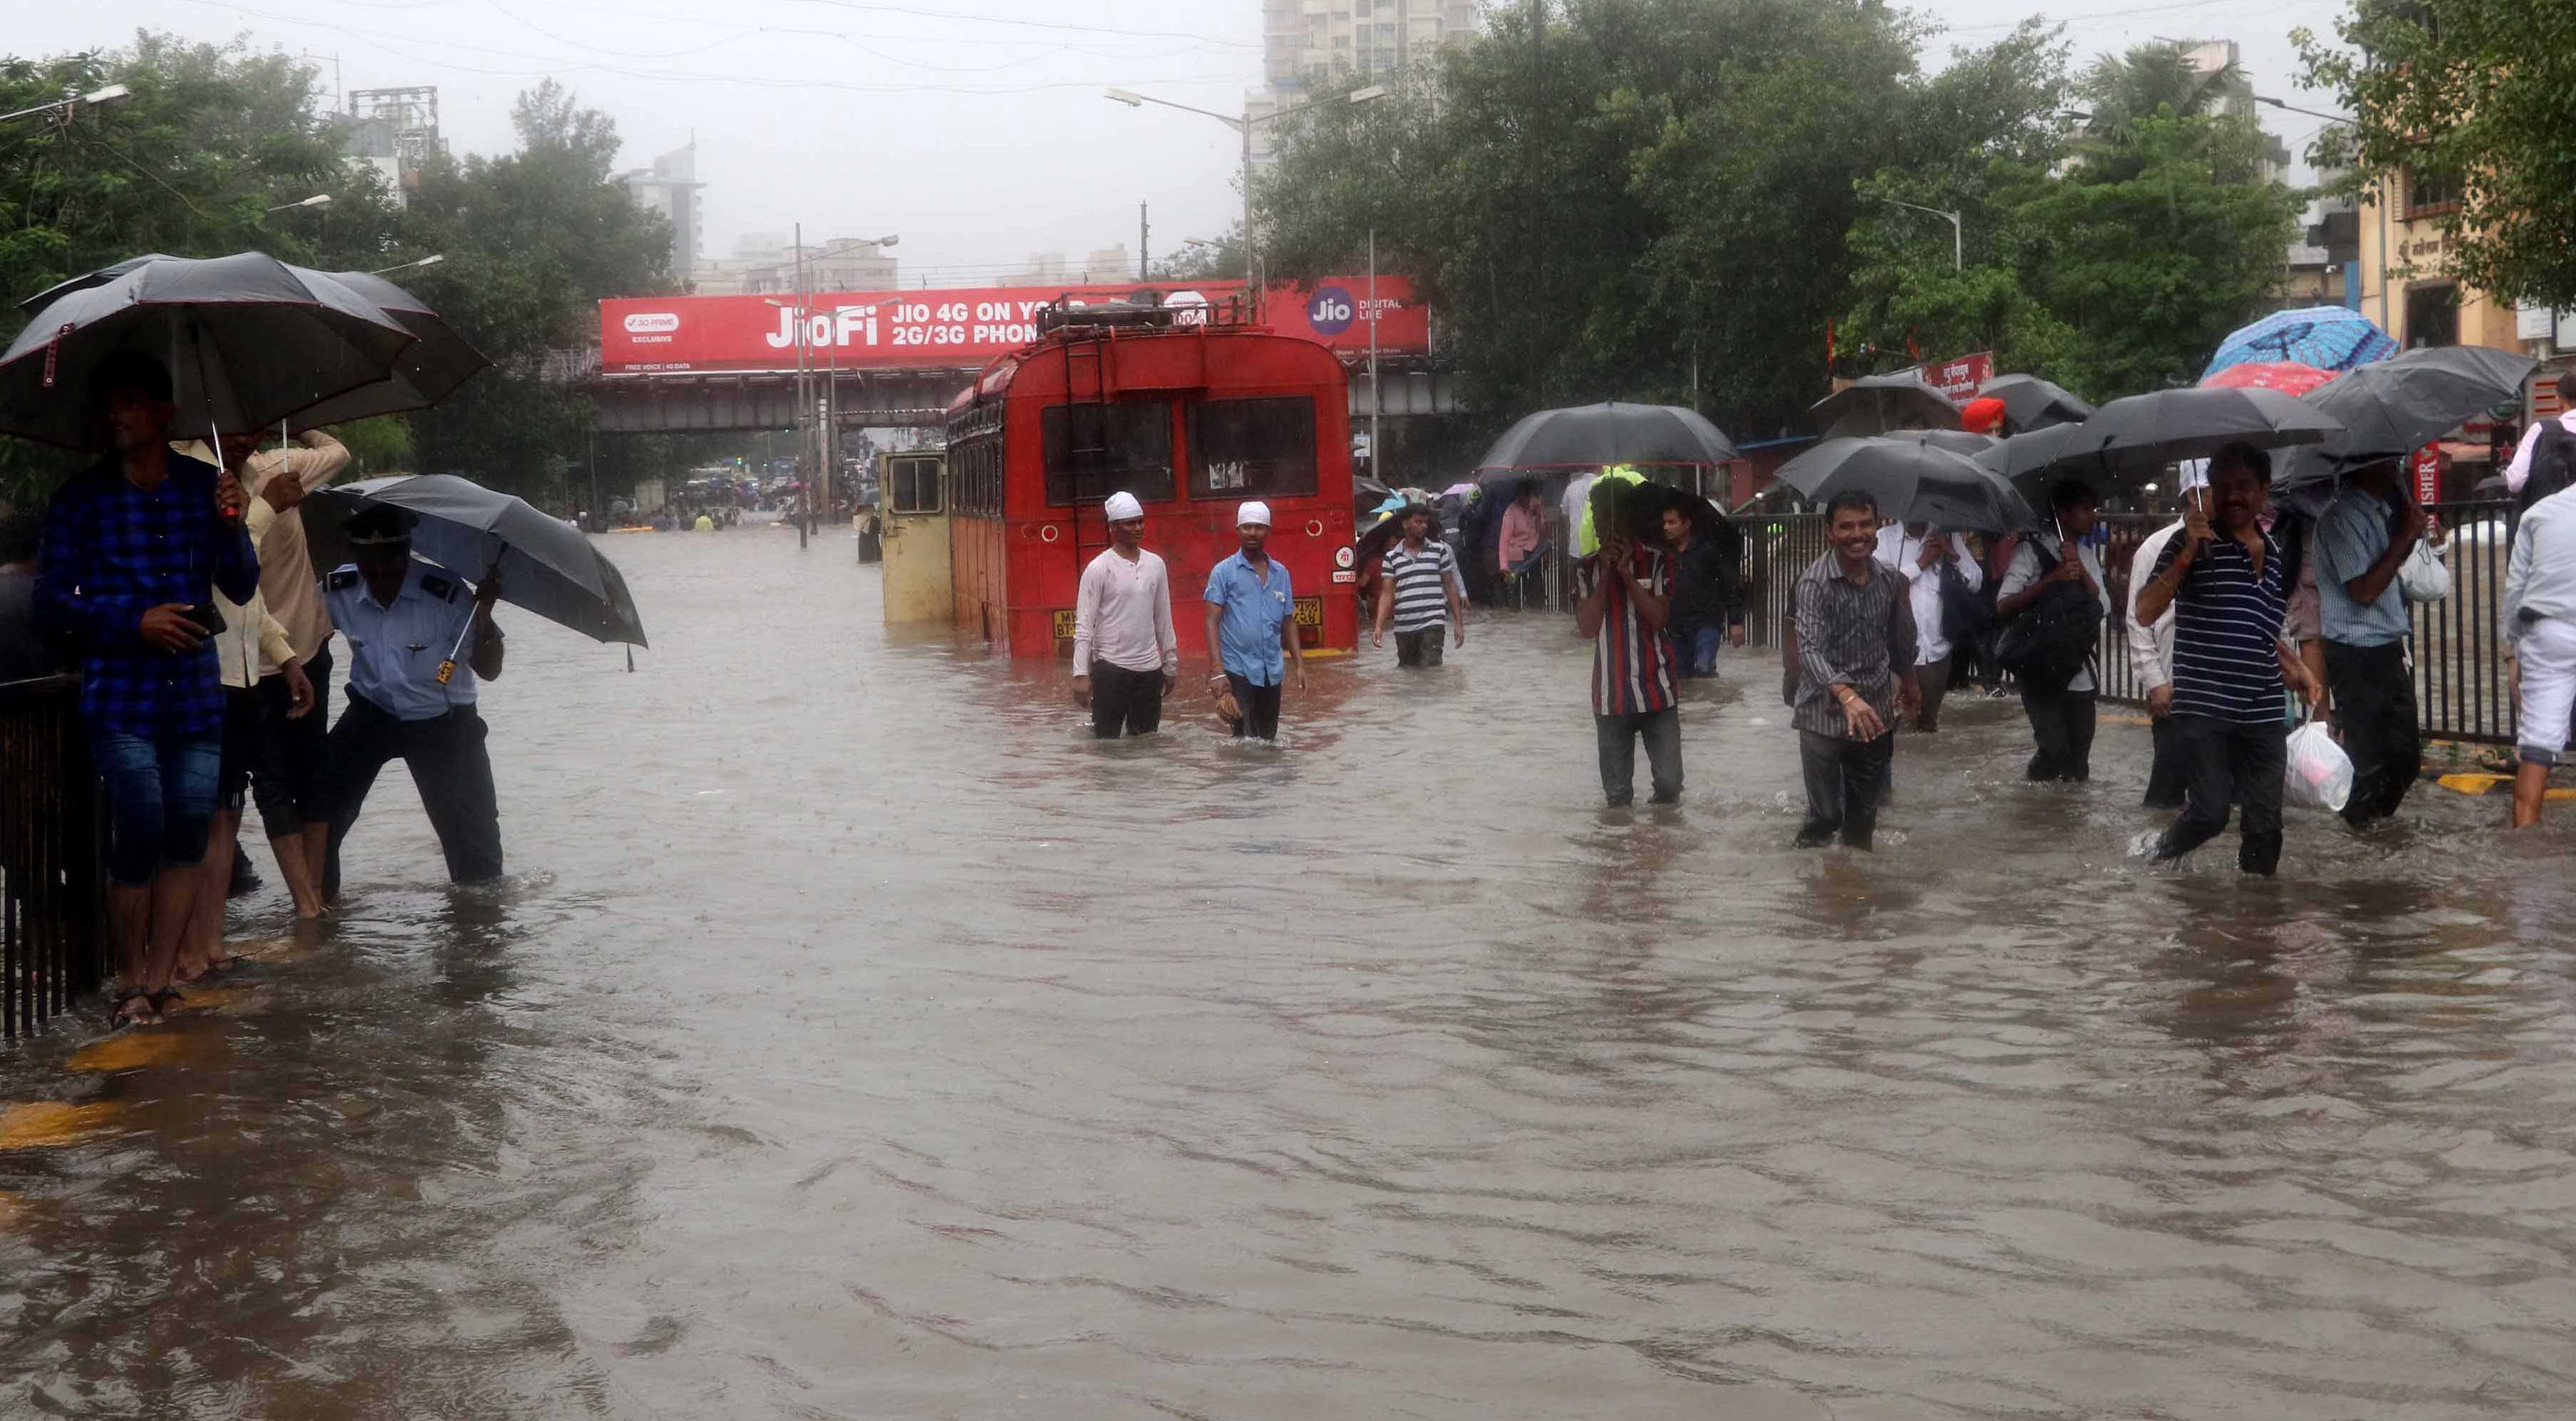 The flooded King's Circle area of central Mumbai on Tuesday as heavy rains lashed the Mumbai city and suburbs. DH Photo